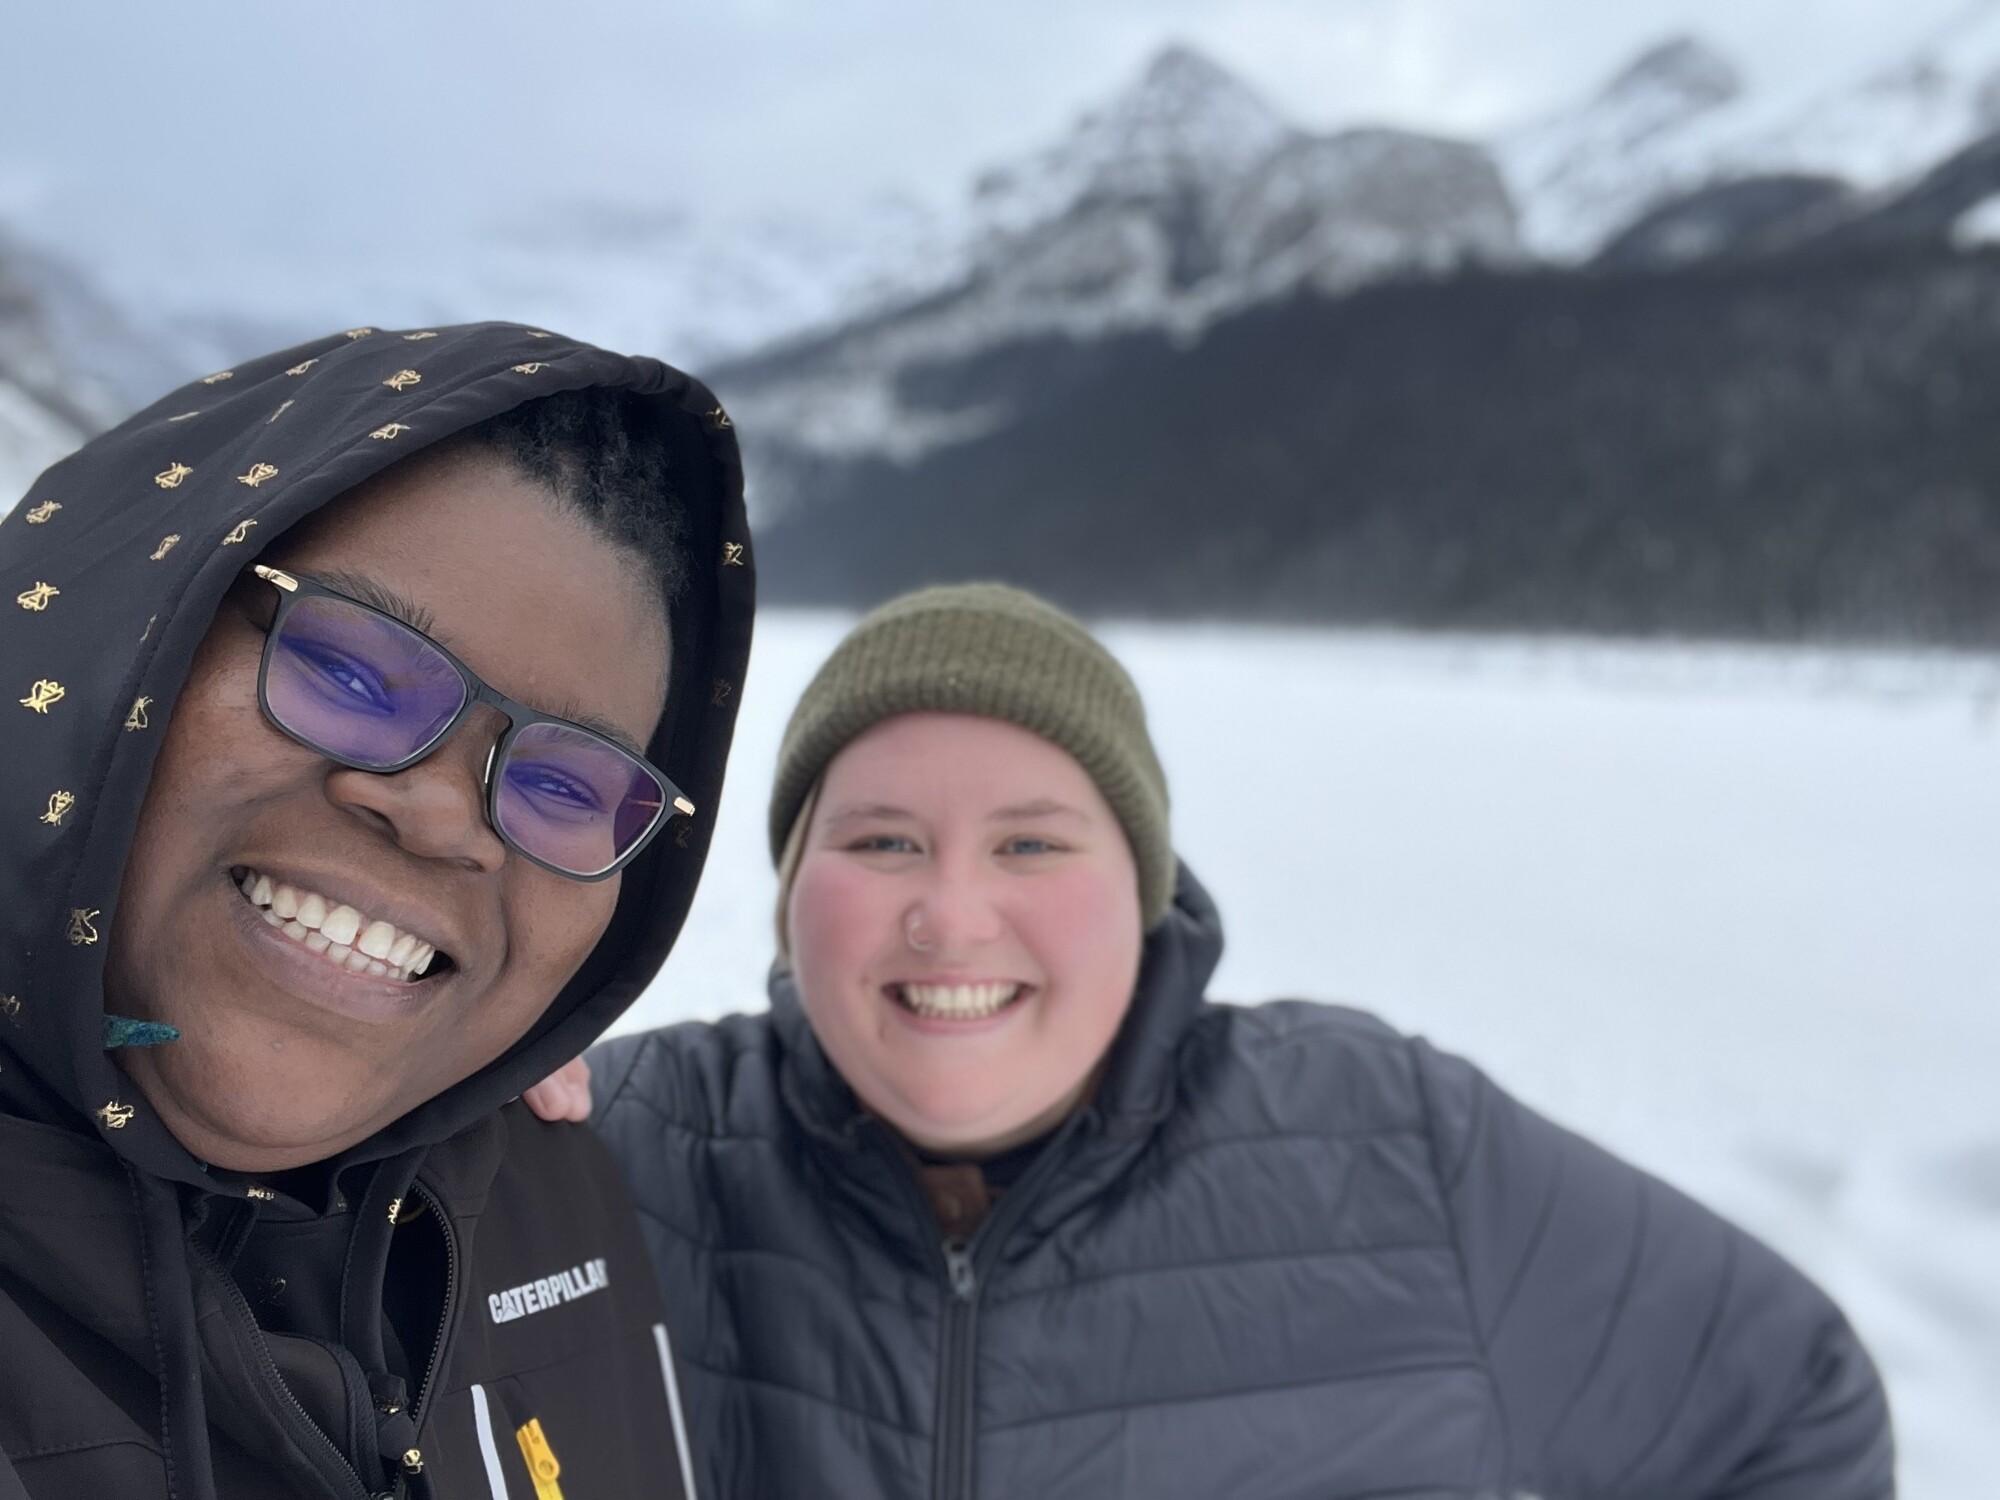 Two people outside on a snowy winter hike smile for a selfie.